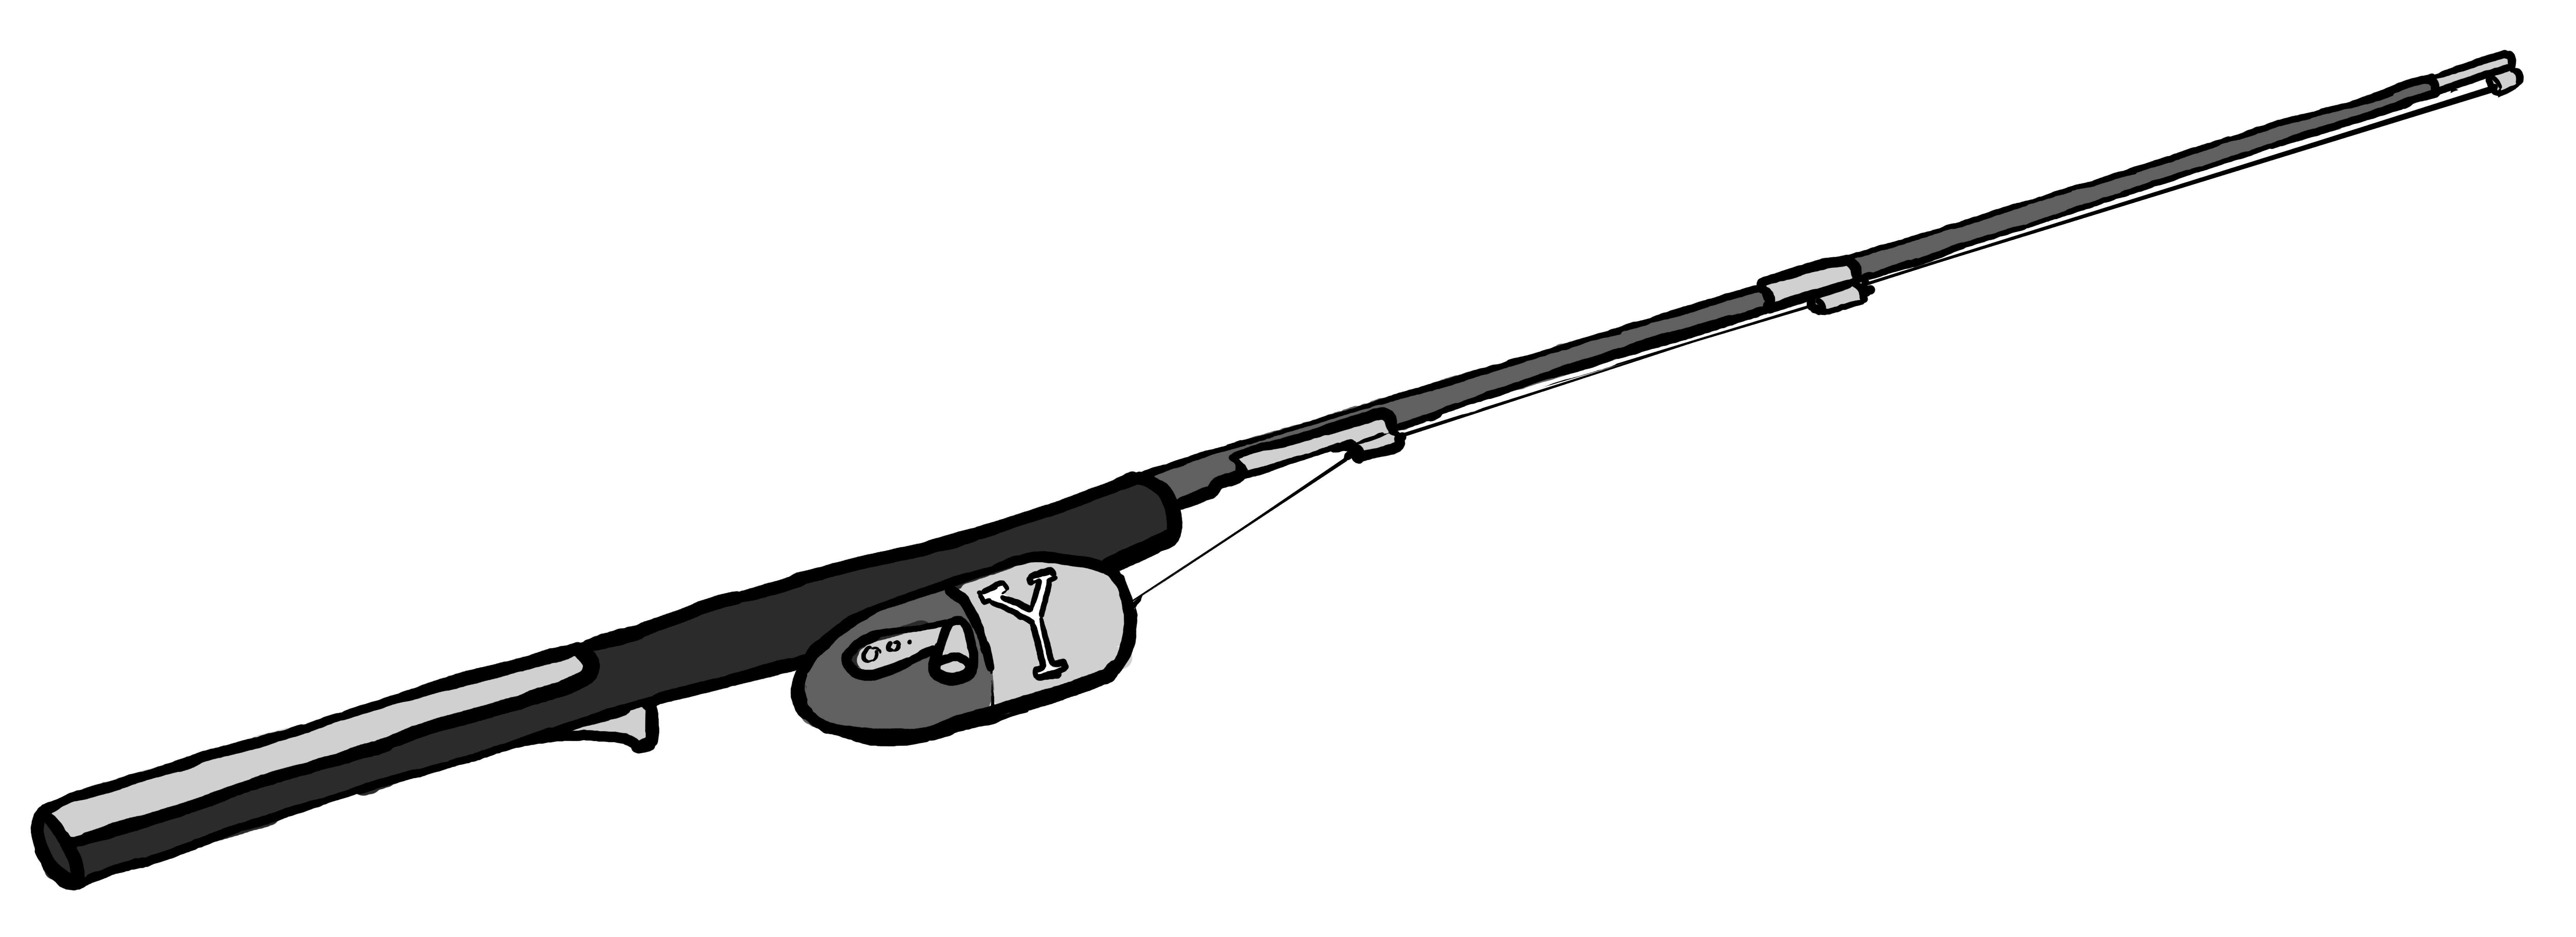 Fishing pole picture clipart